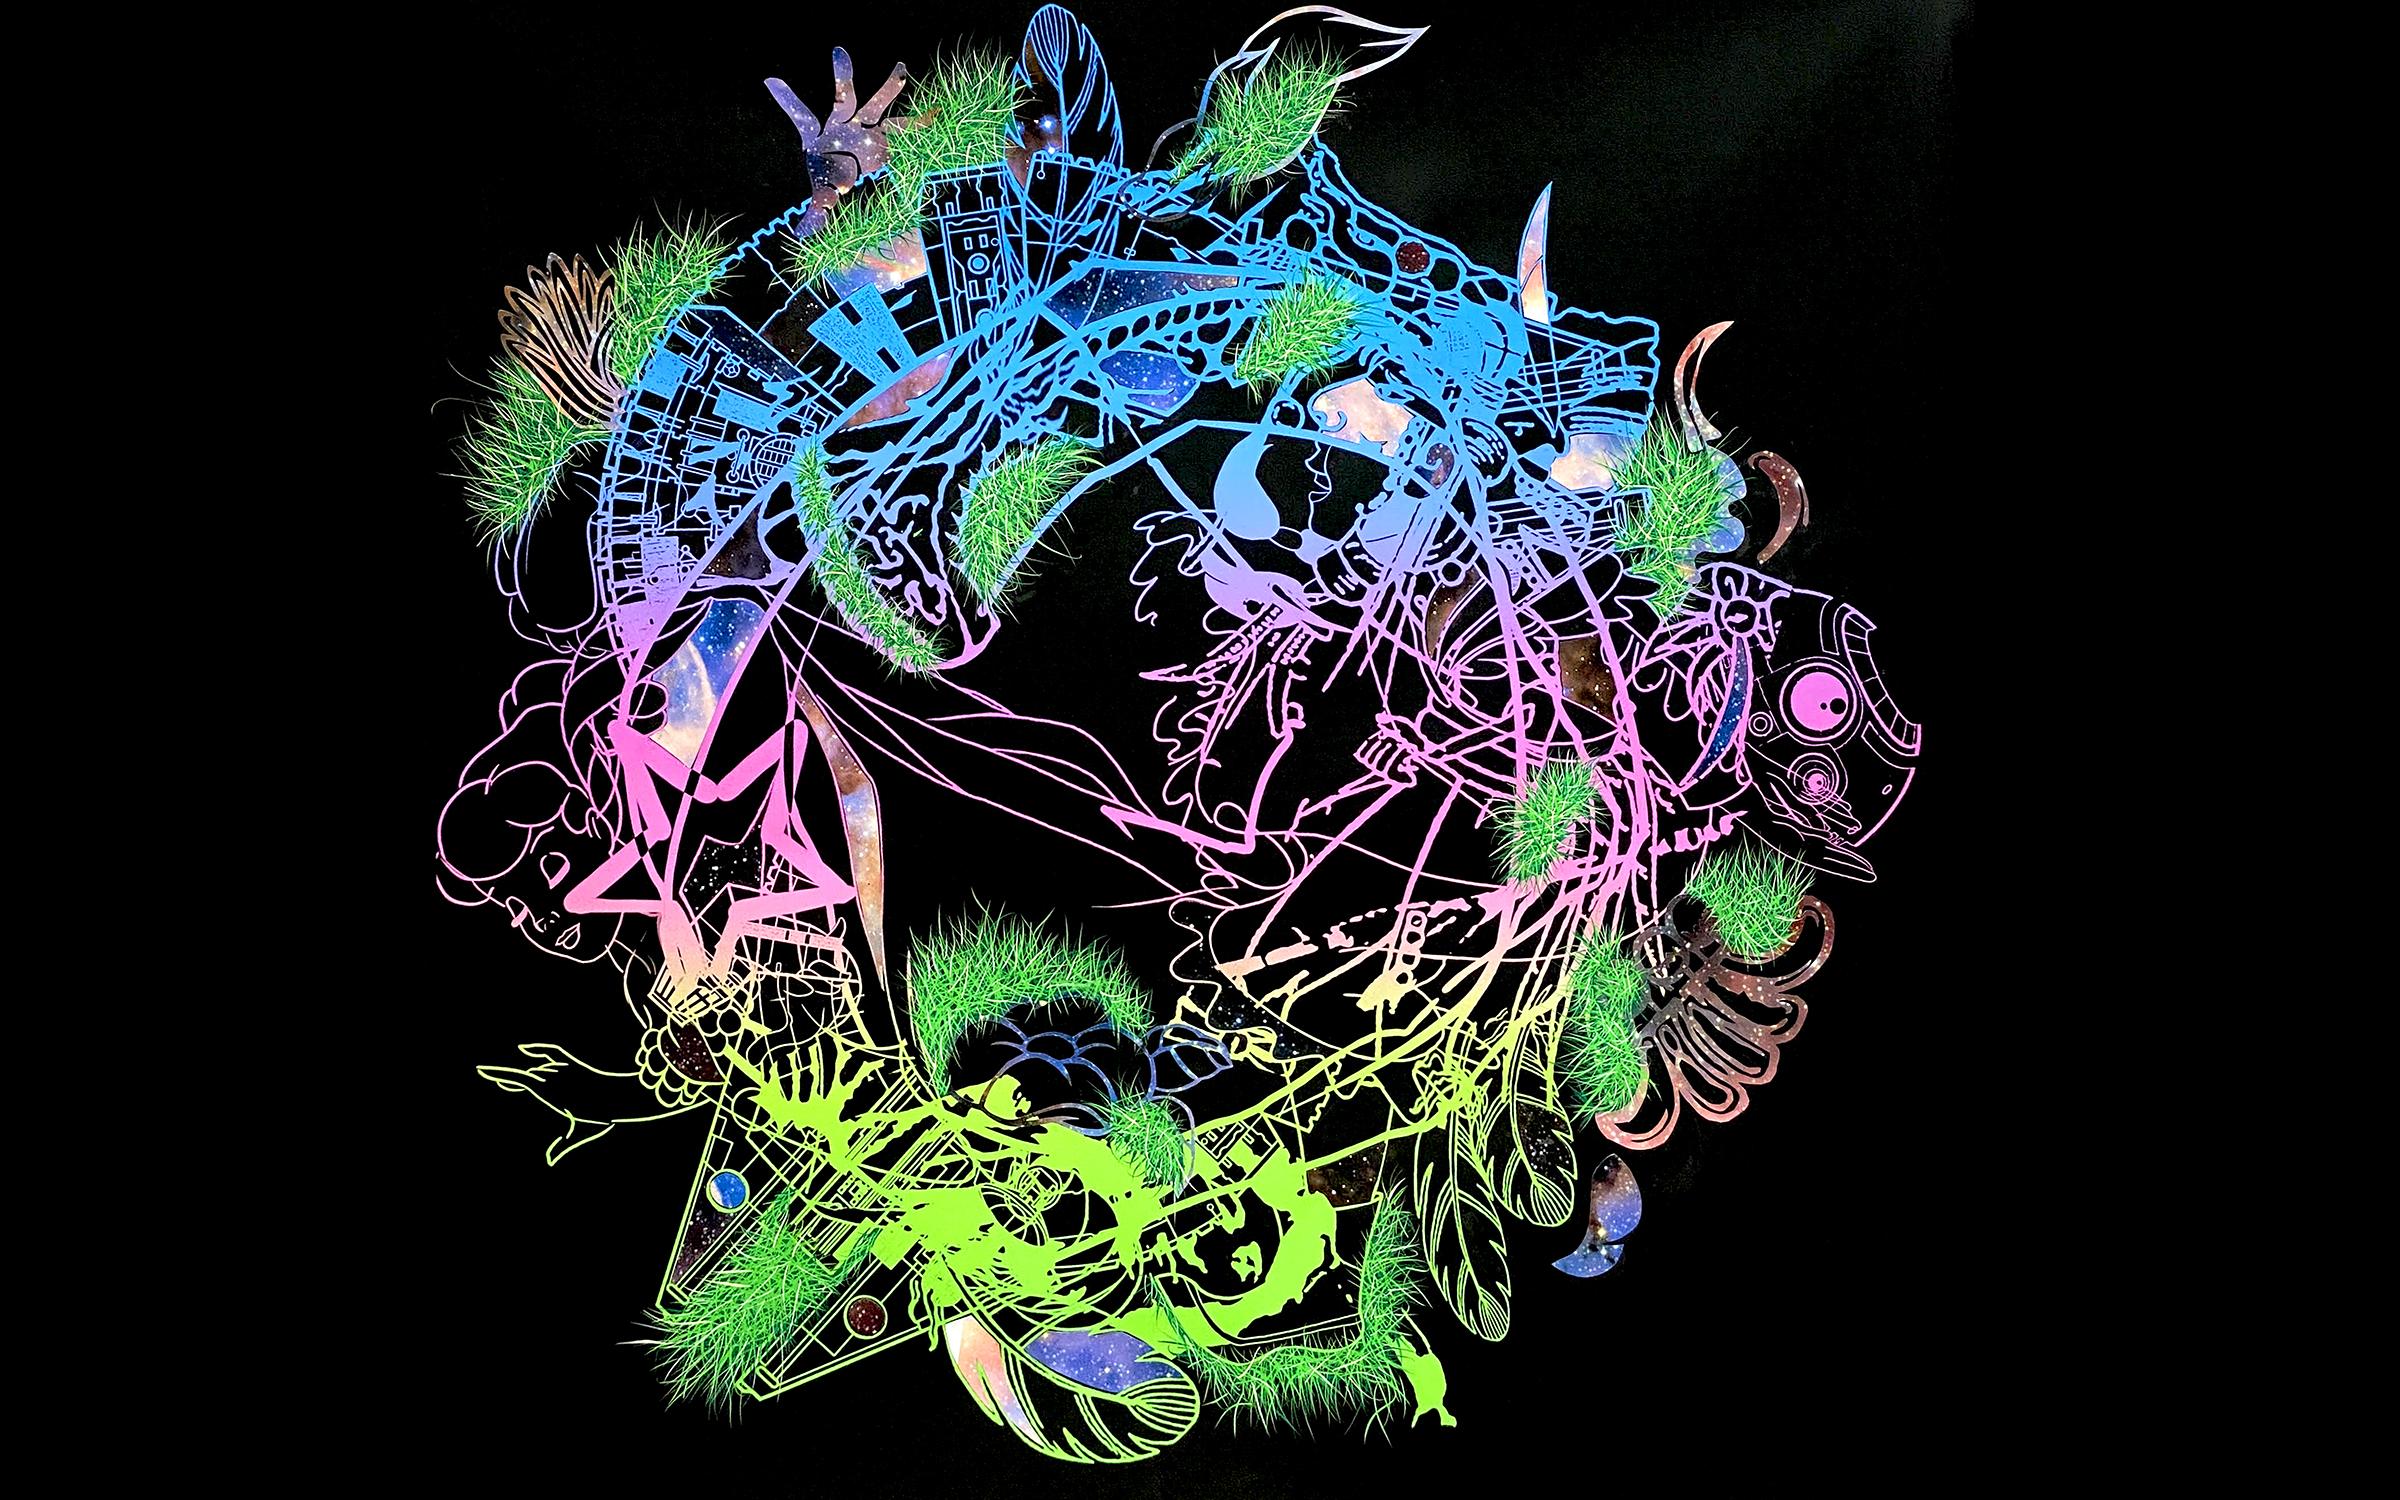 a swirling circle of symbols and lines in bright blues, pinks and greens on black background 